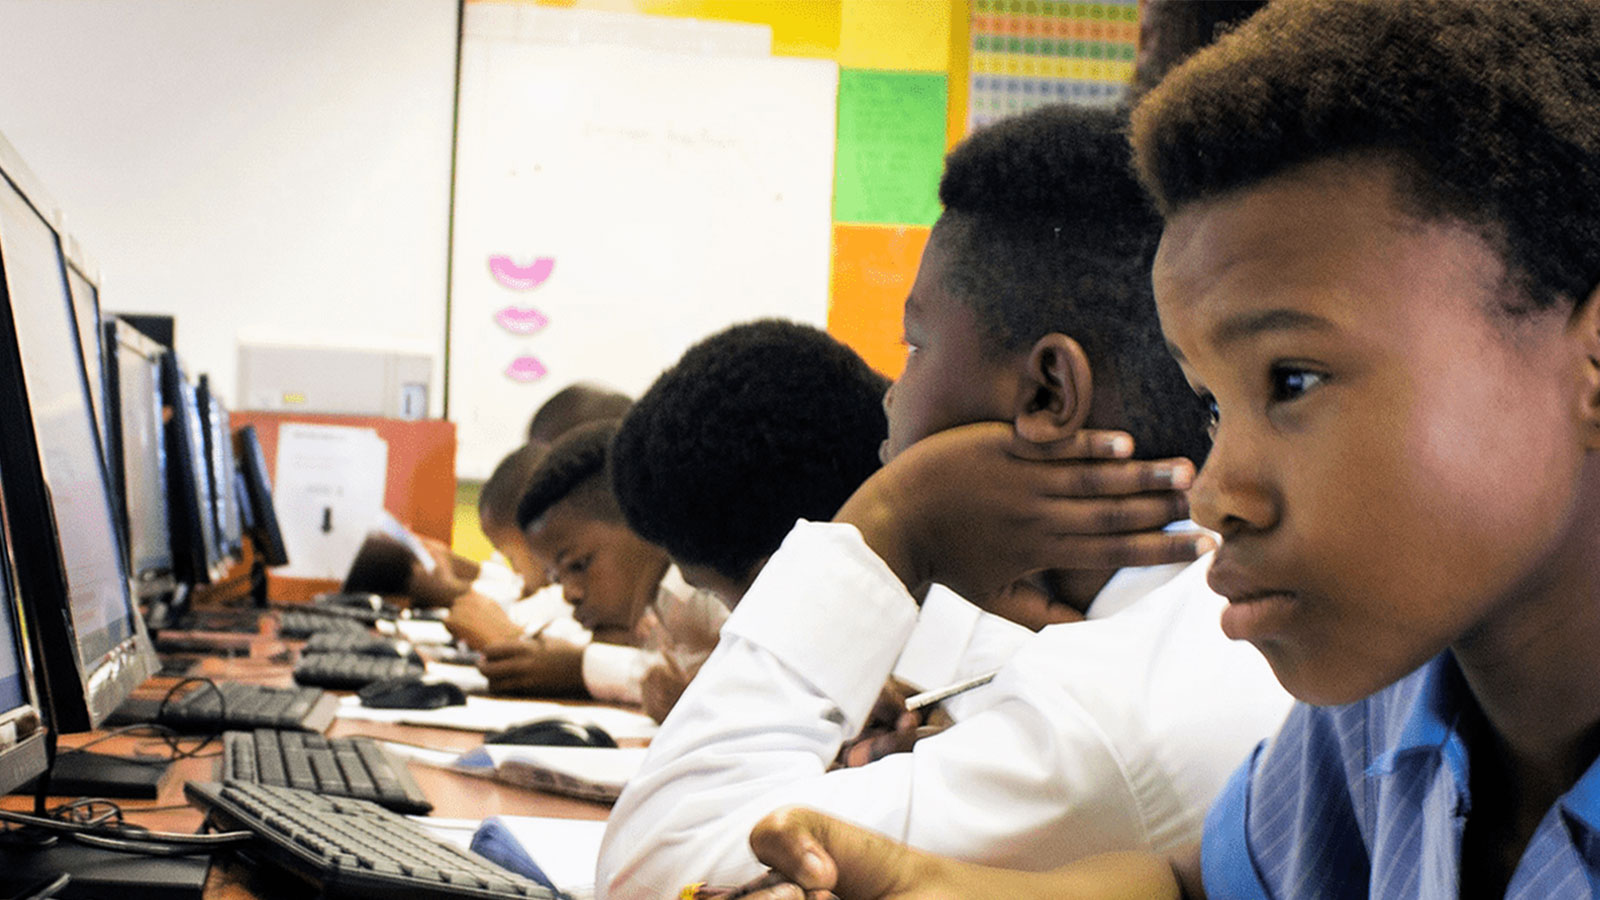 Students in South Africa working on an assignment